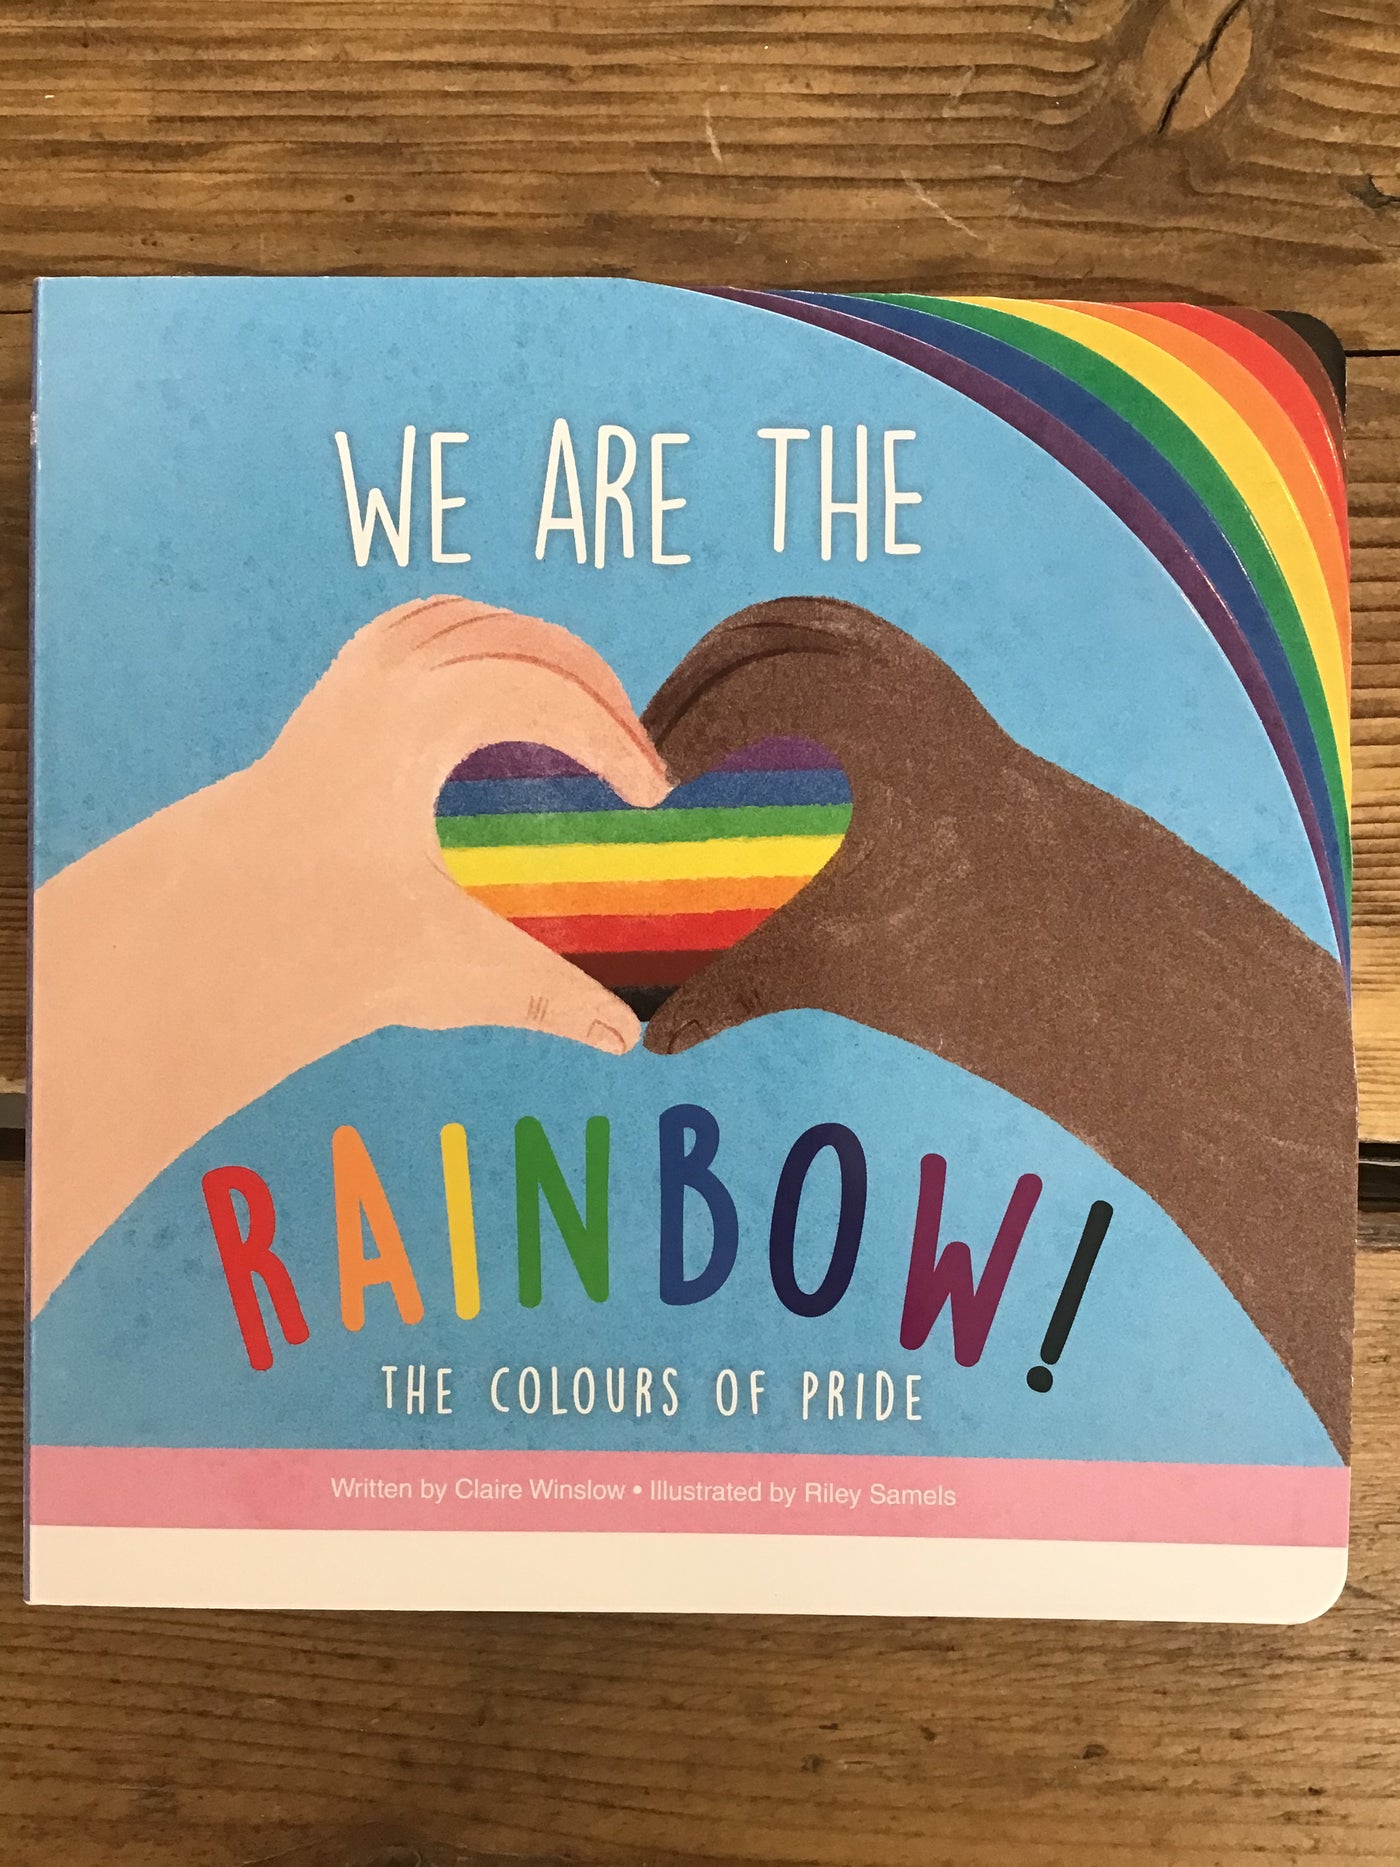 We Are the Rainbow